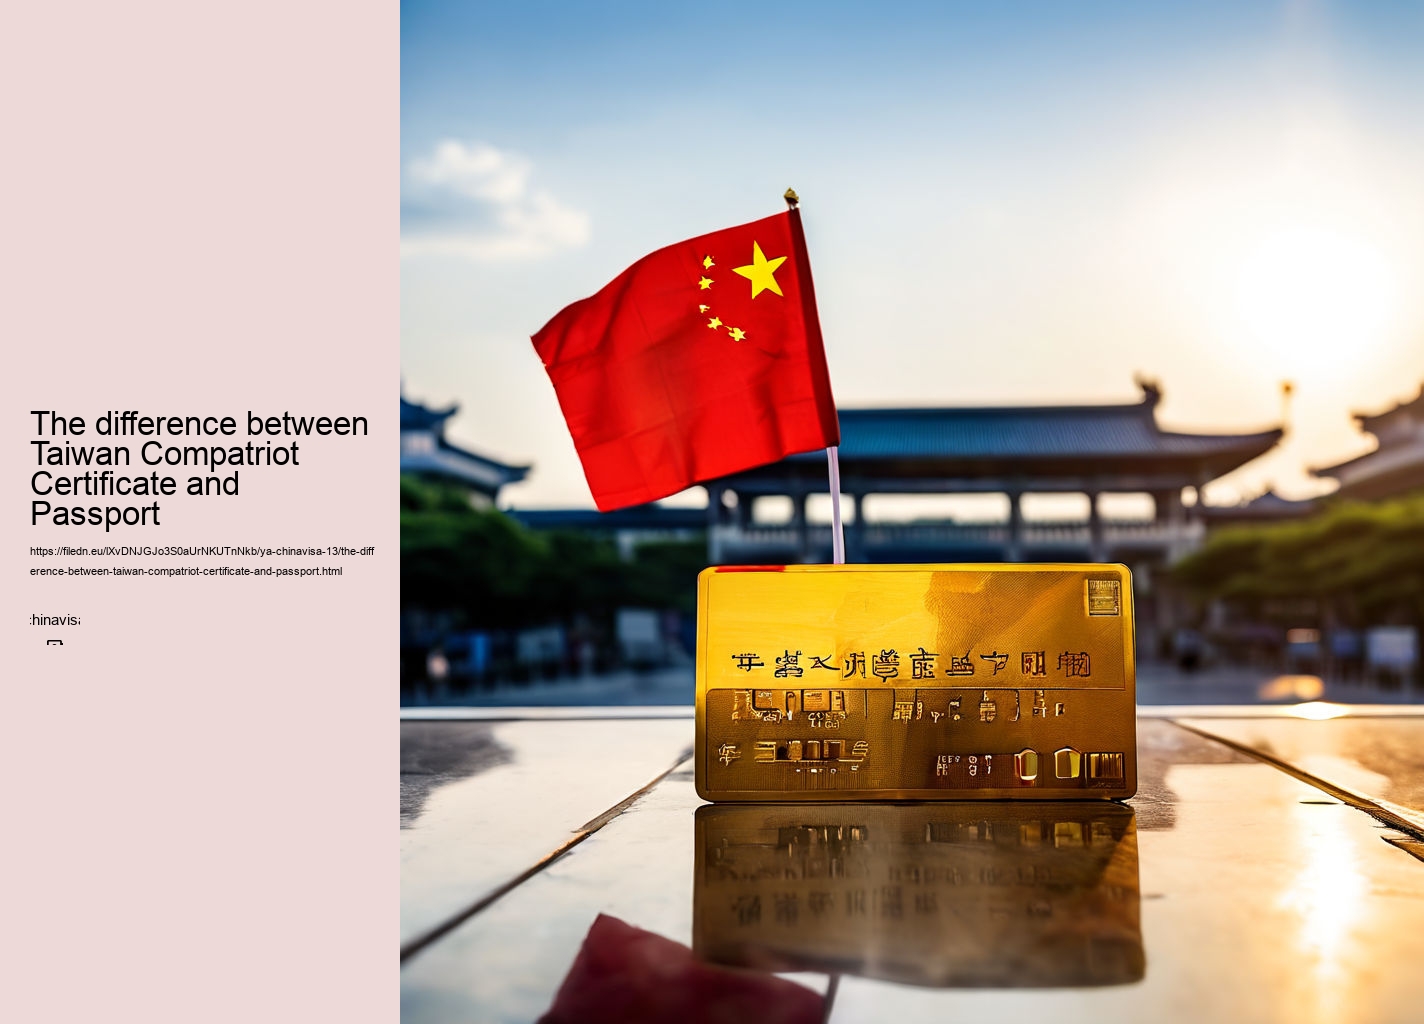 The difference between Taiwan Compatriot Certificate and Passport